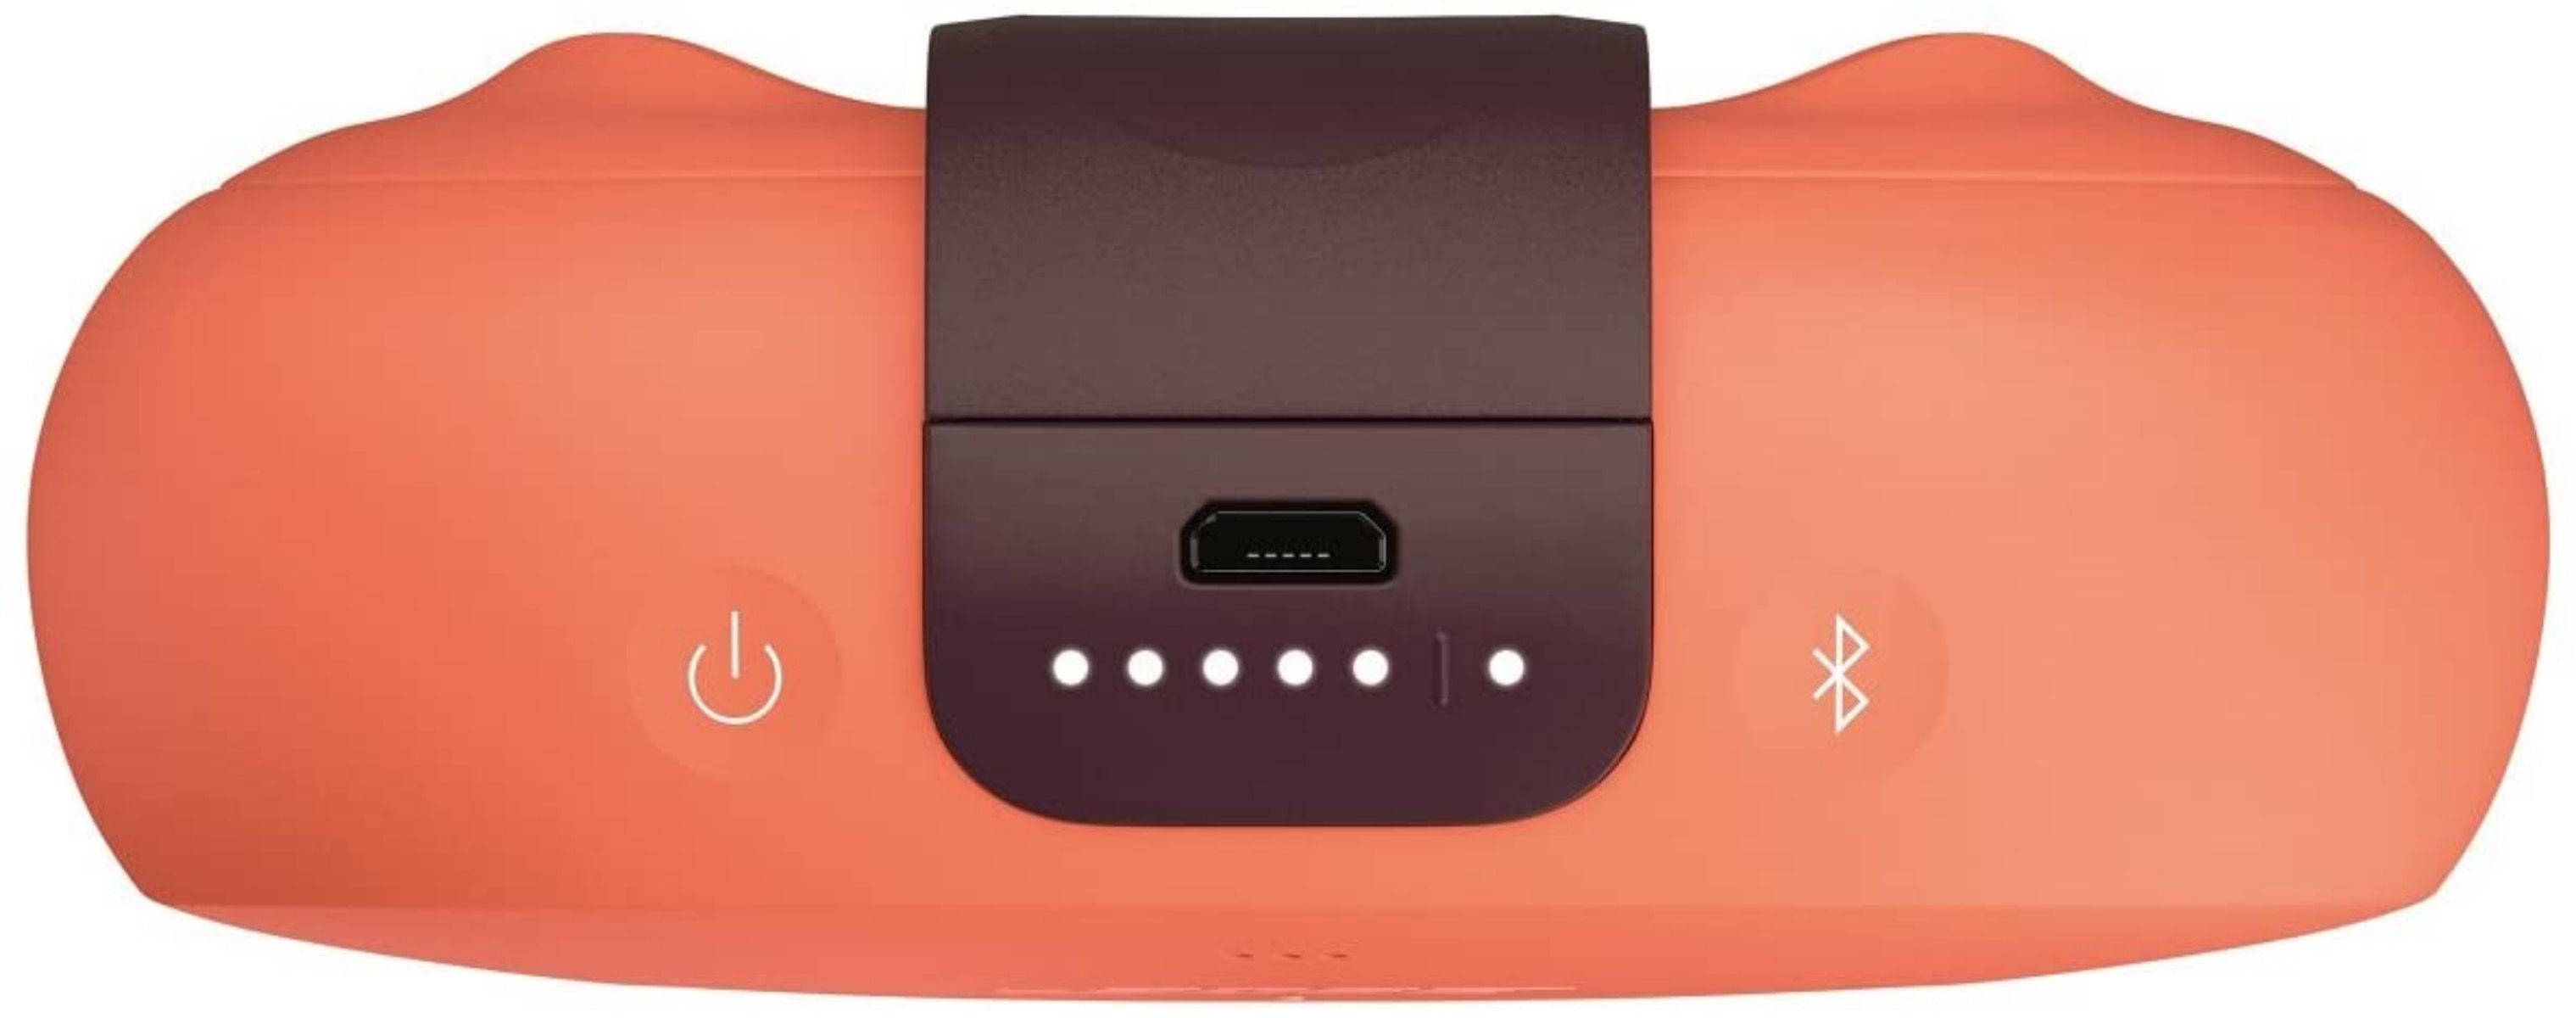 Bose SoundLink Micro lying flat showing the buttons and port on the bottom of orange speaker